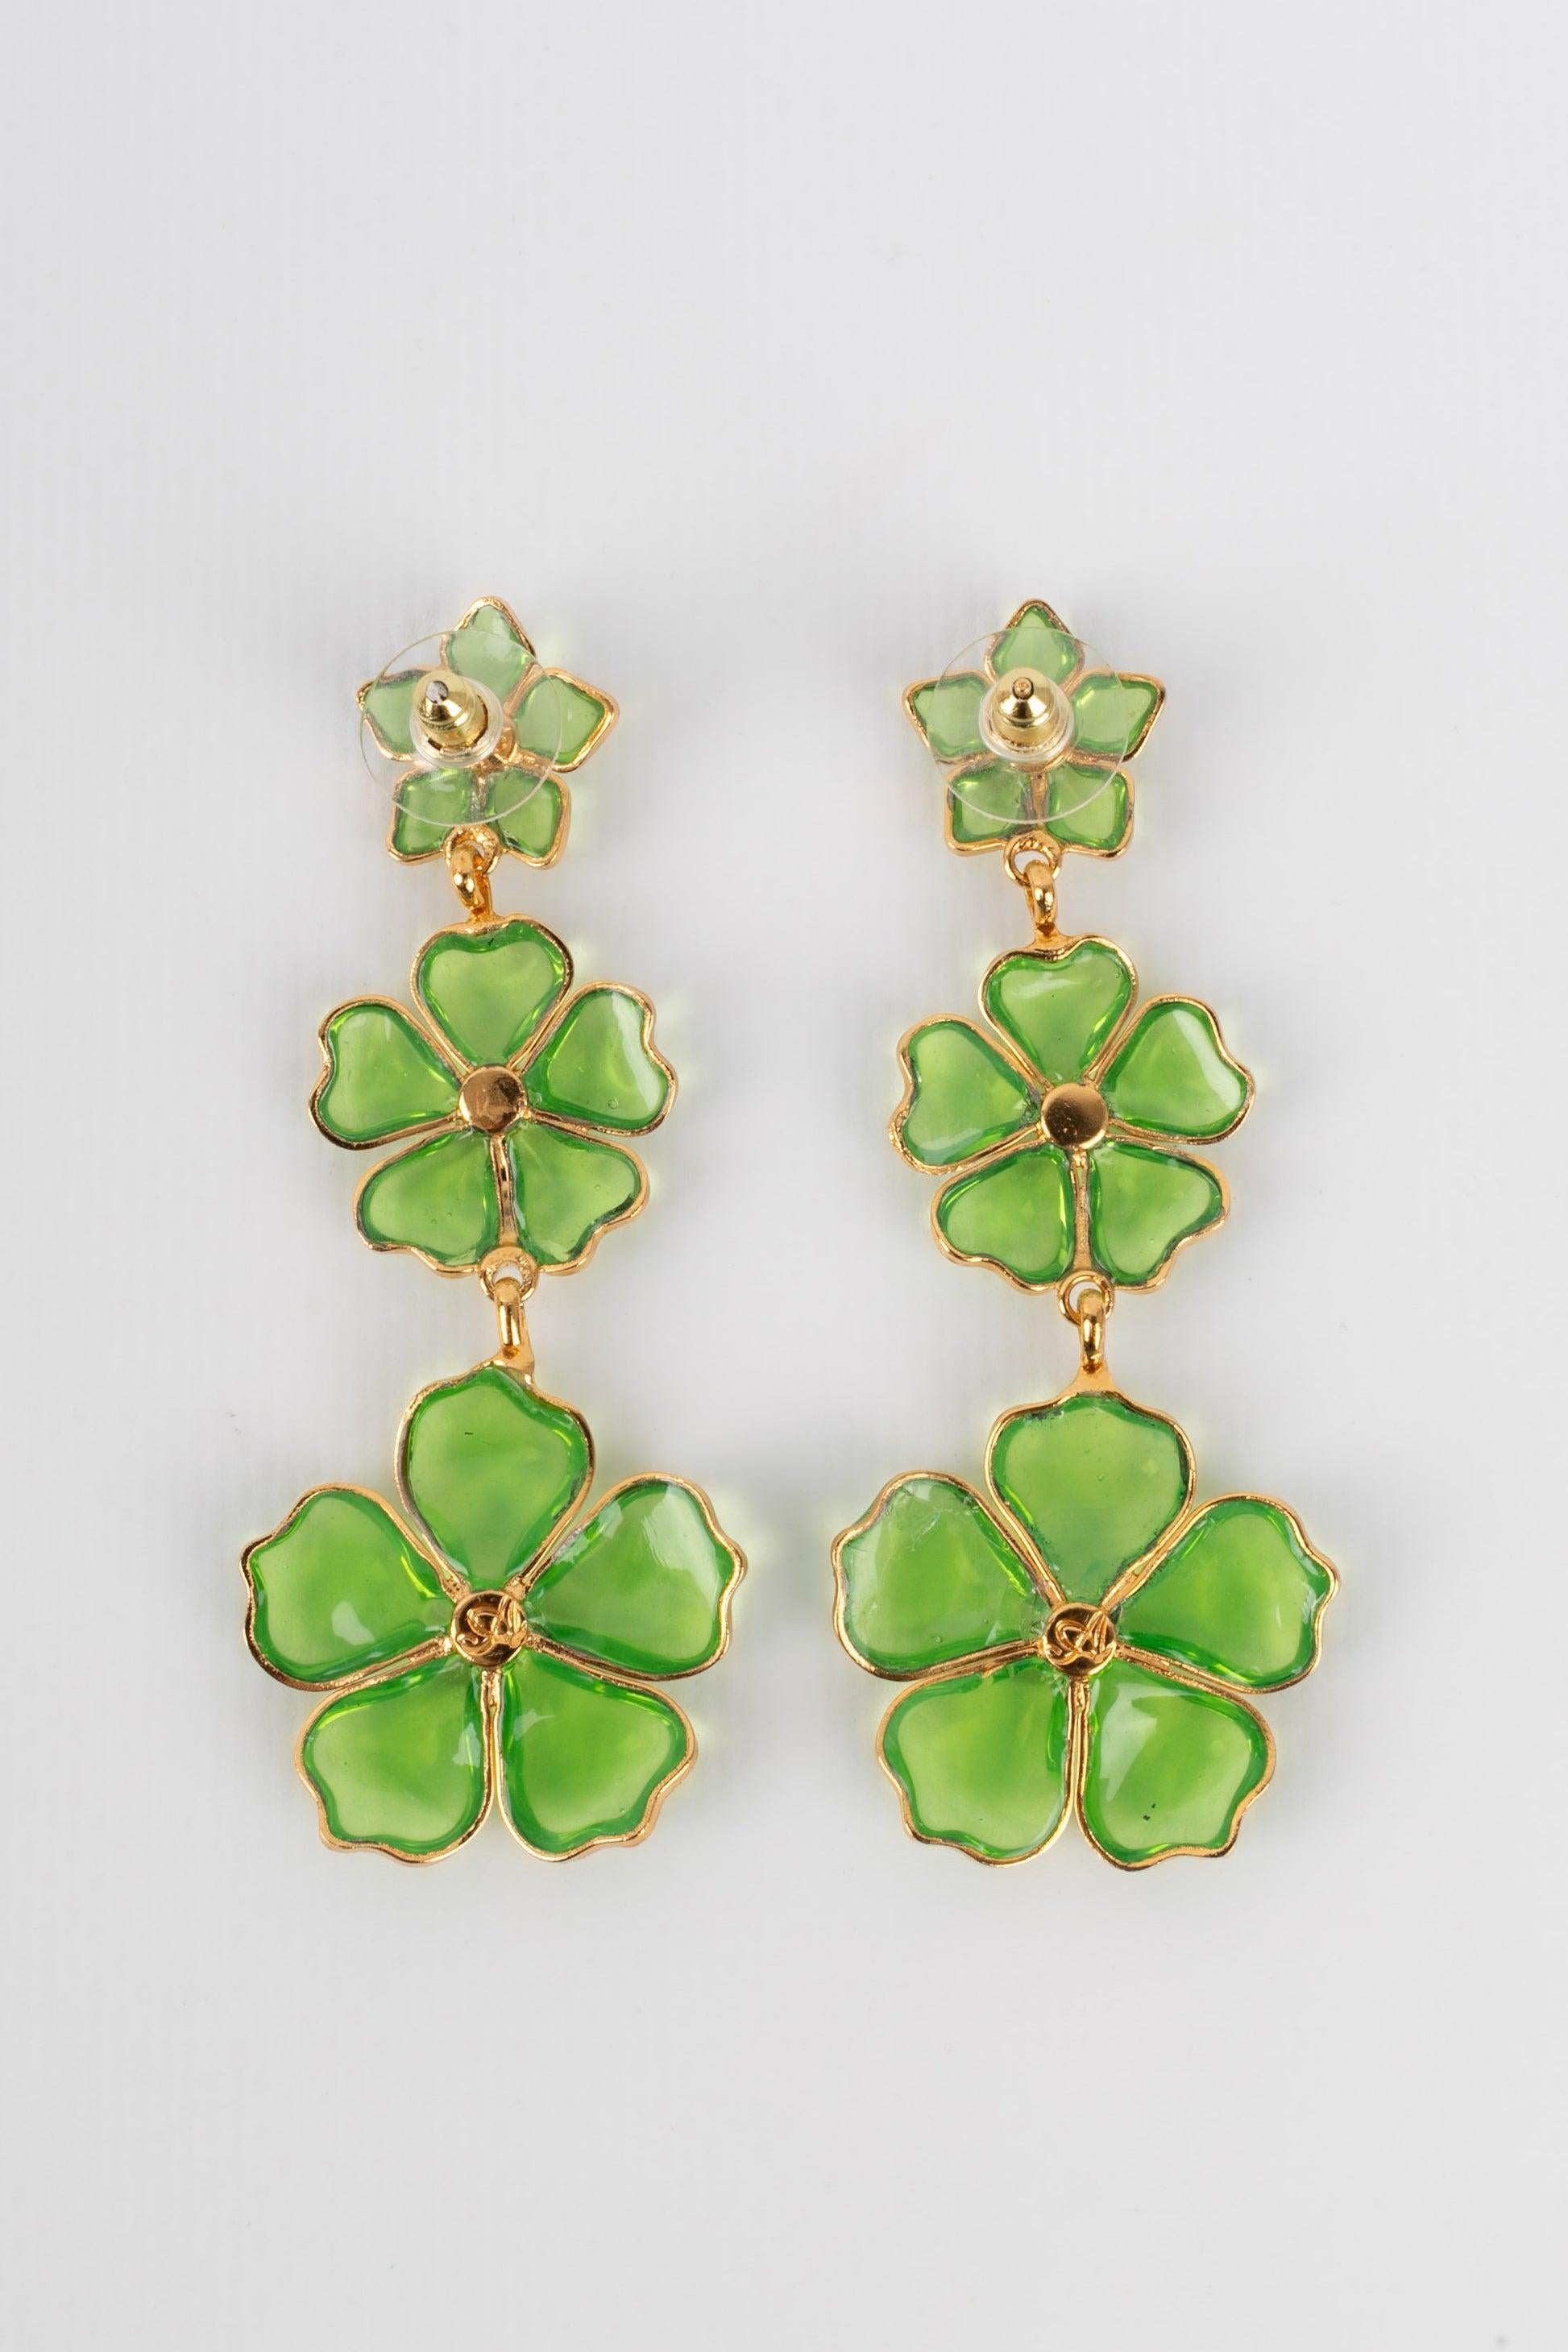 Augustine - Golden metal earrings with rhinestones and light green glass paste.

Additional information:
Condition: Very good condition
Dimensions: Height: 7.5 cm

Seller Reference: BO287